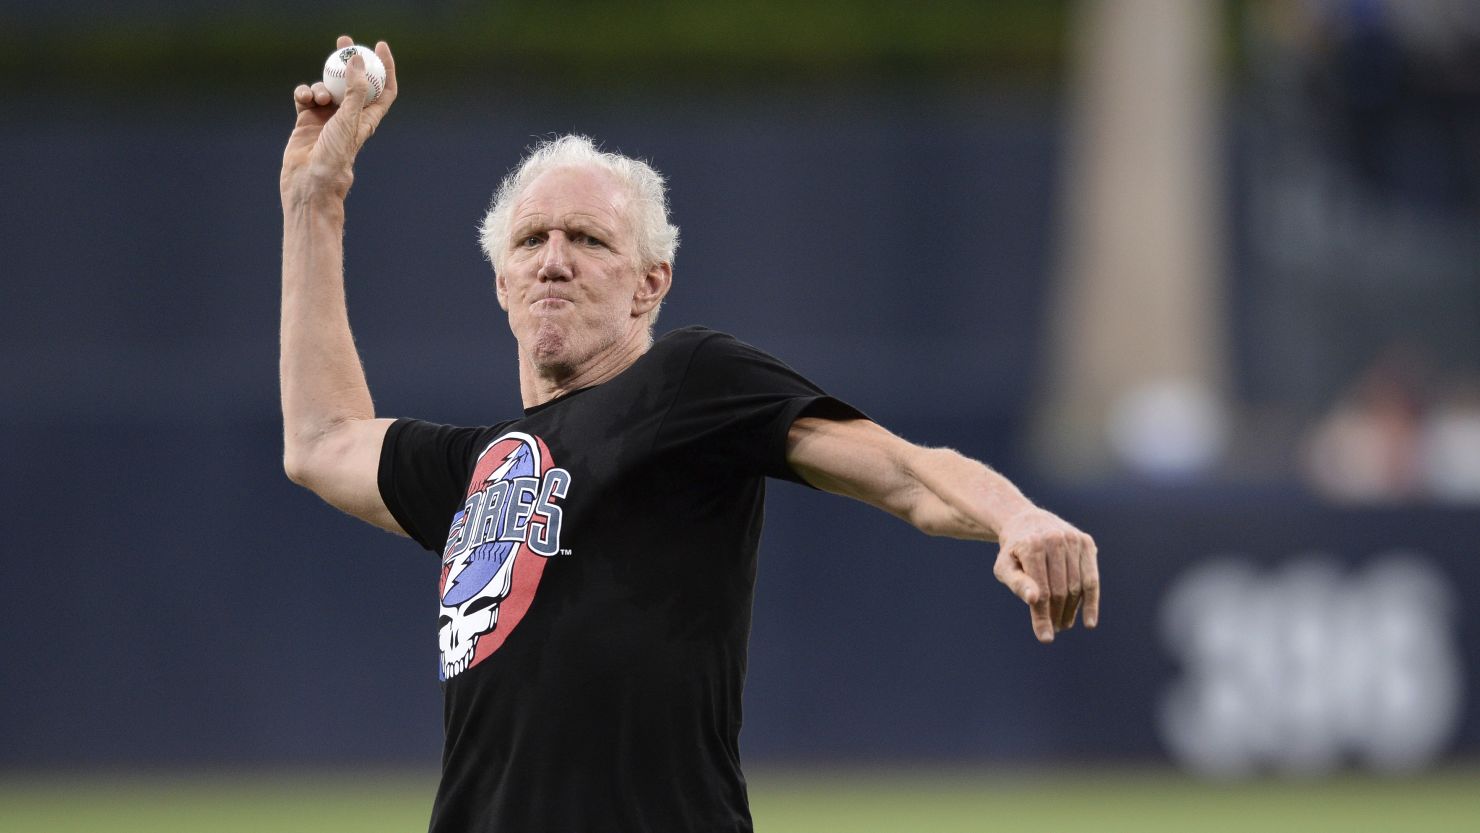 Bill Walton throws out the first pitch before the game between the San Diego Padres and the Colorado Rockies.